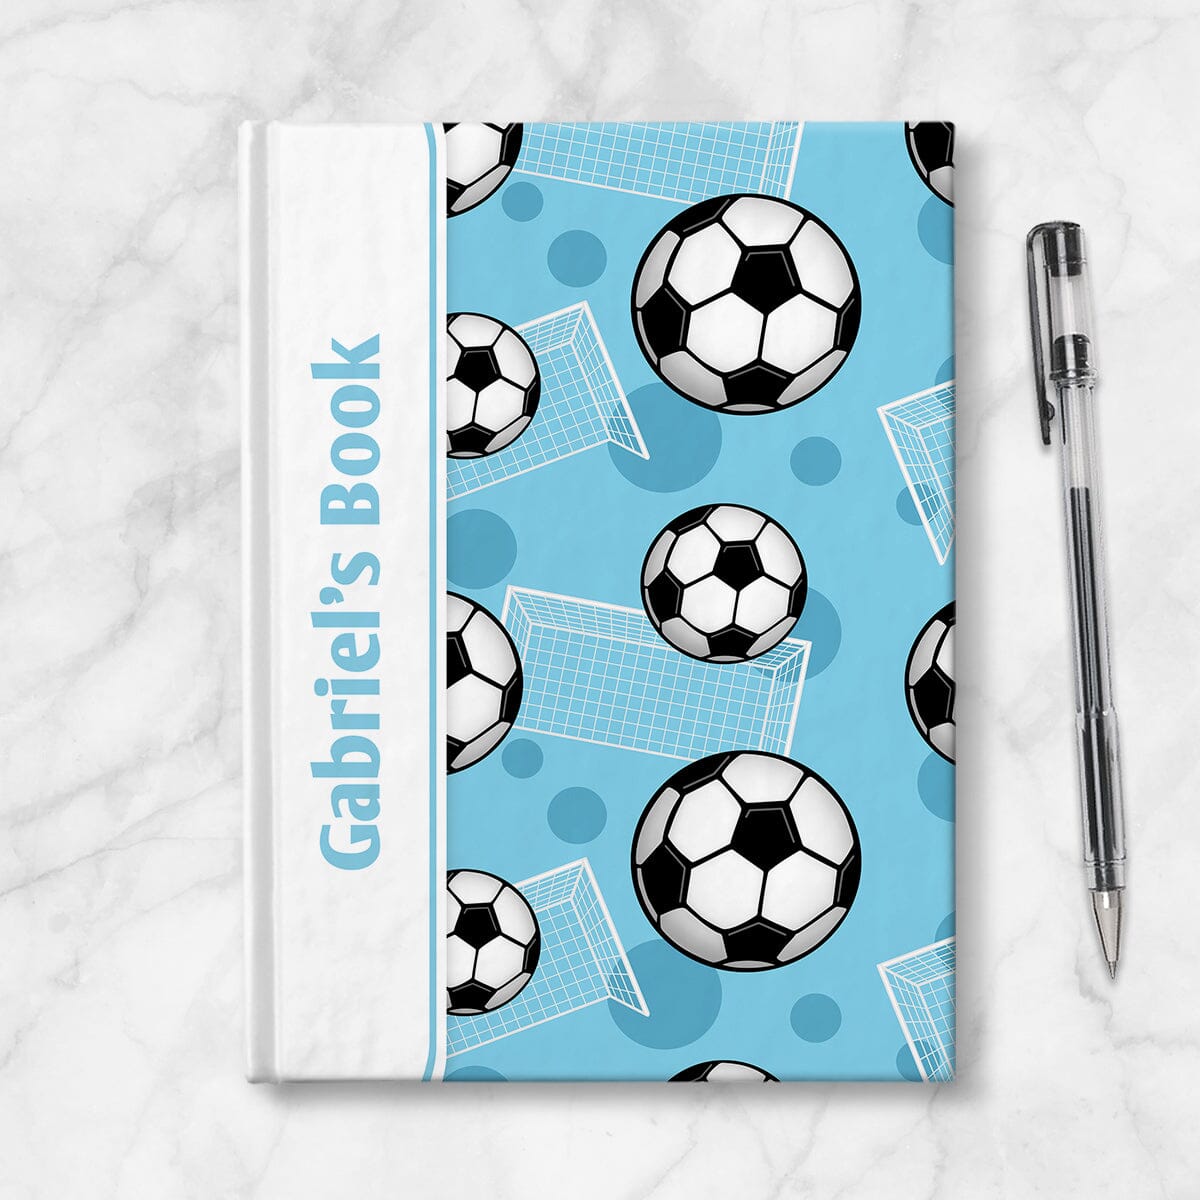 Personalized Blue Soccer Journal at Artistically Invited. Image shows the book on a countertop next to a pen.